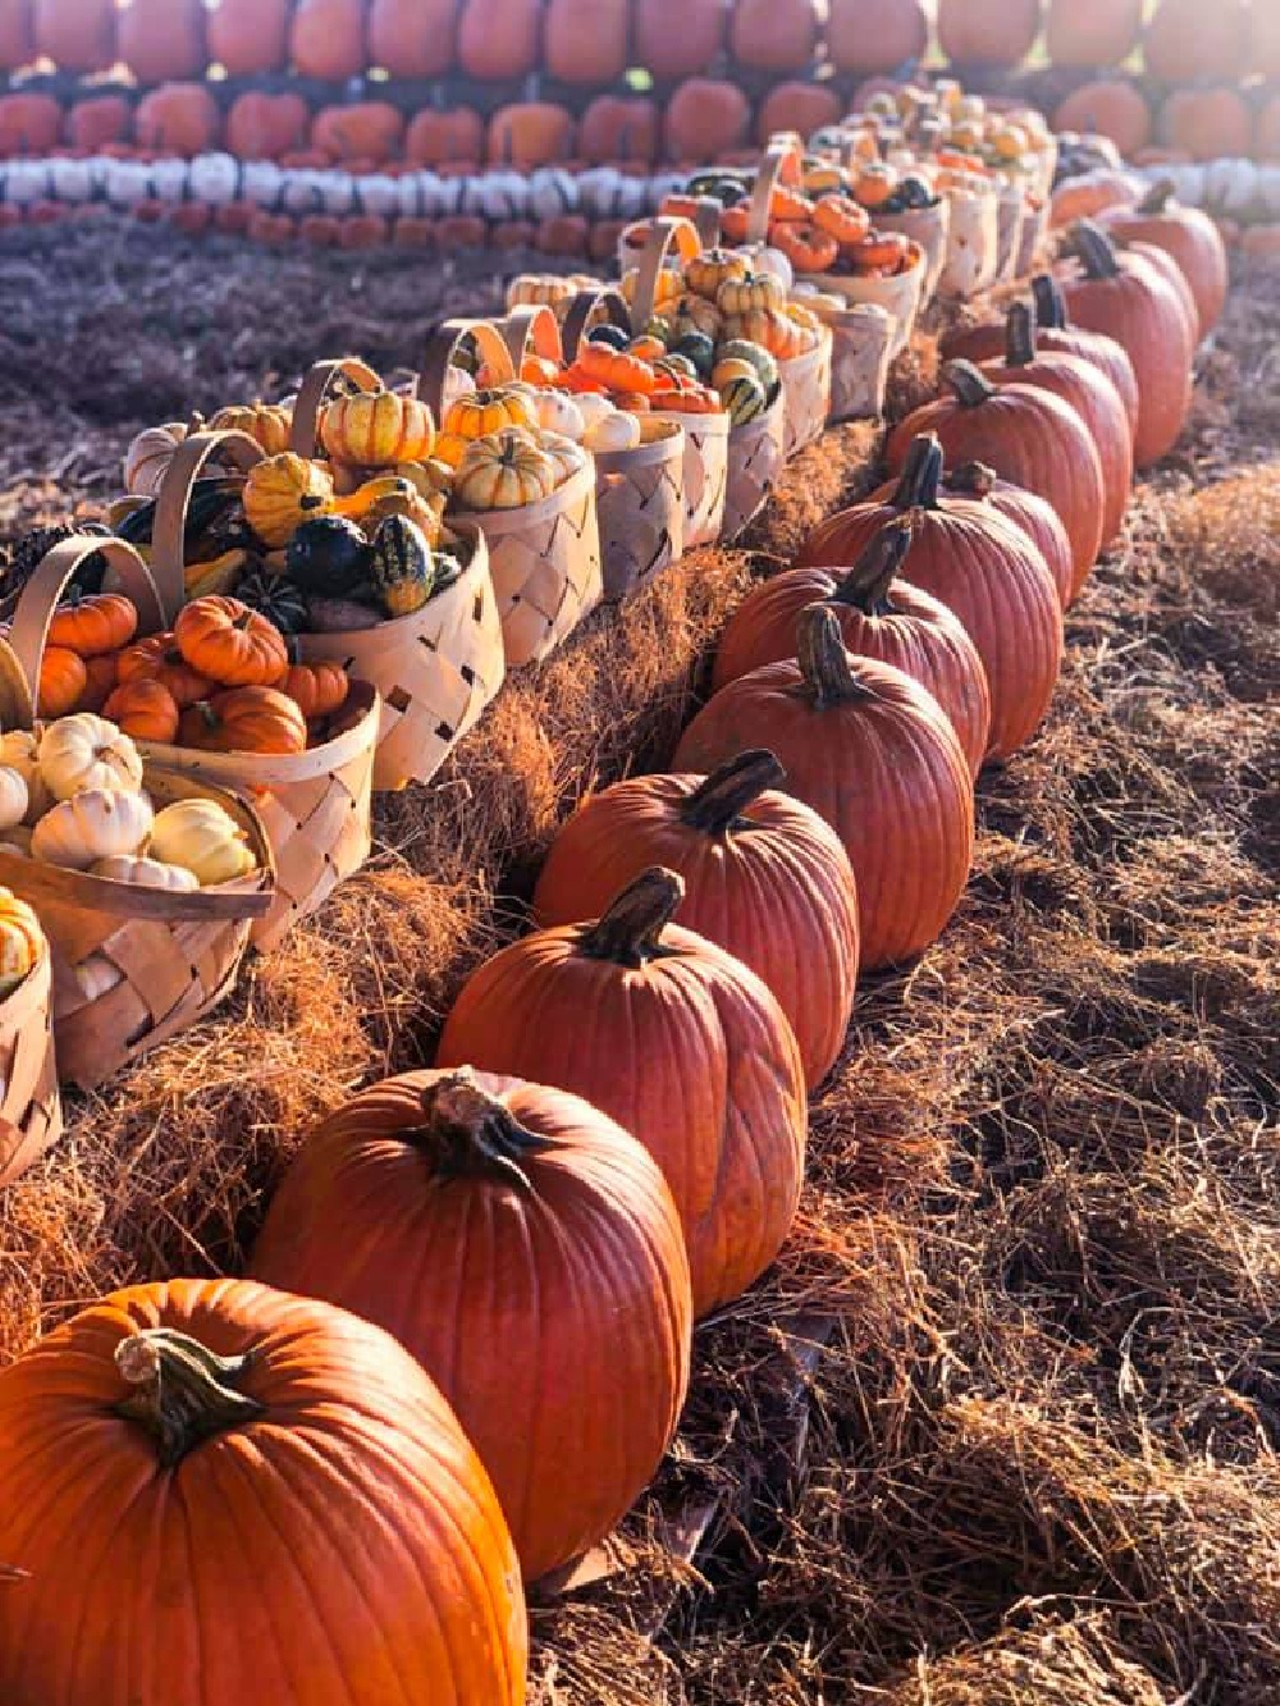 20 Central Florida pumpkin patches and corn mazes where you can